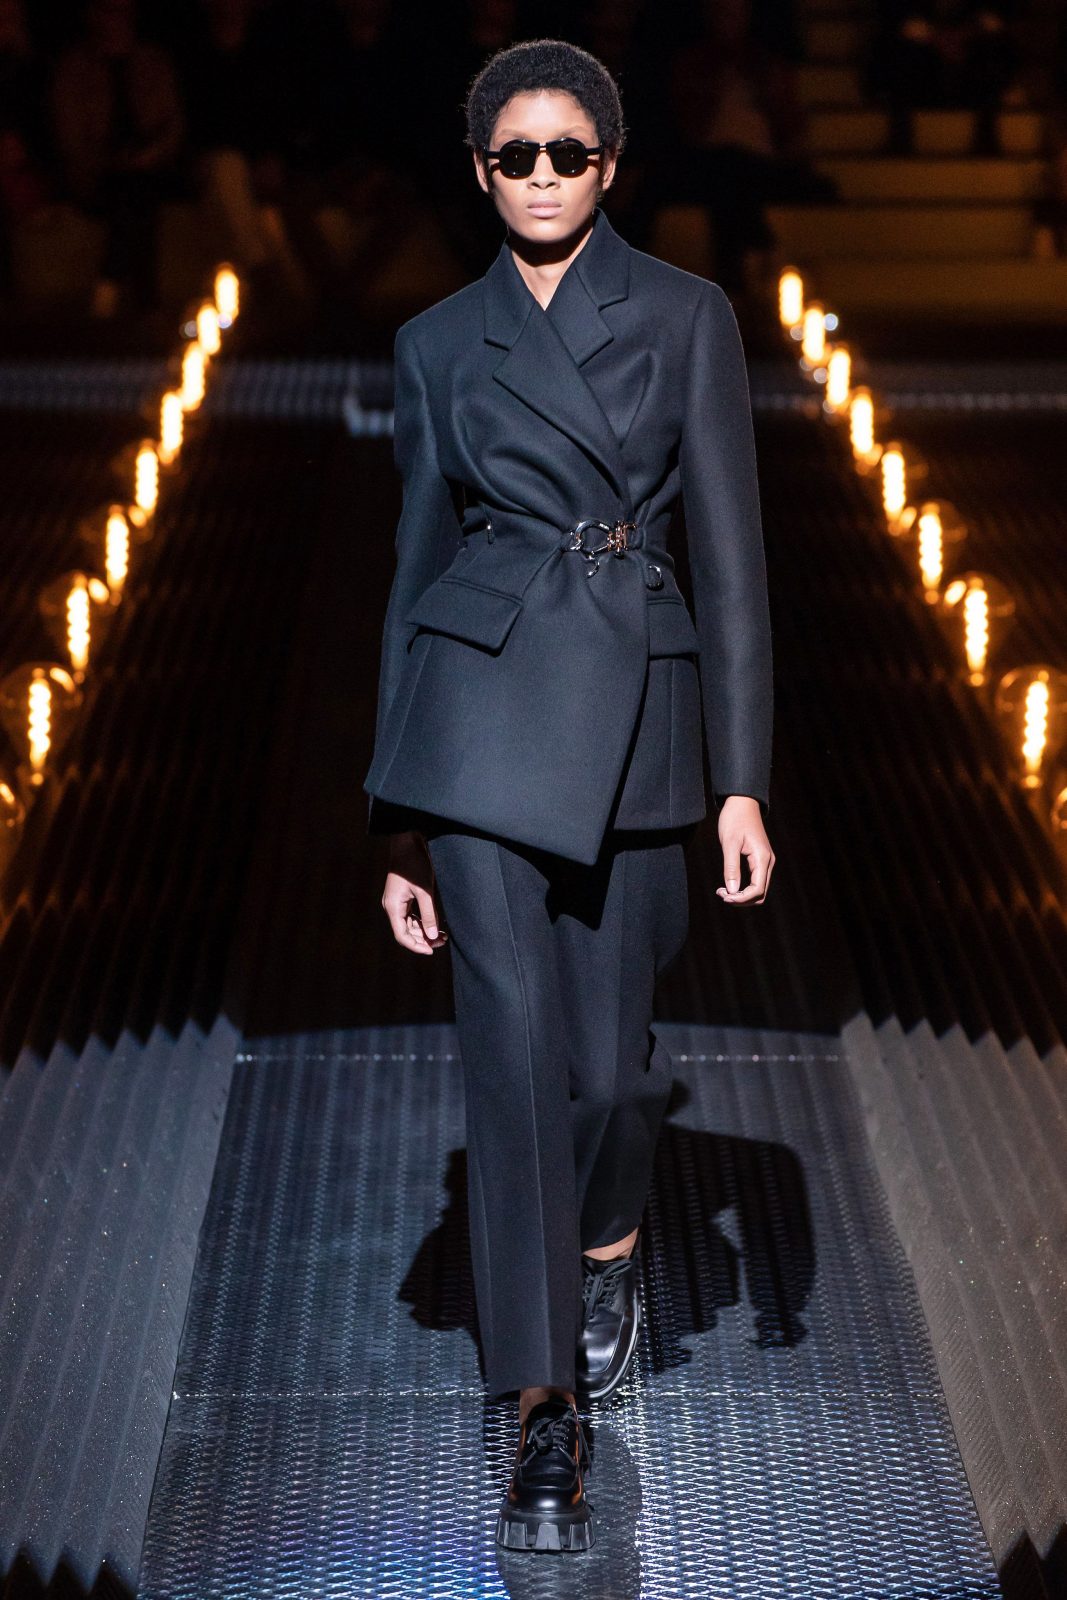 Women's Tailored Suits From The A/W19 